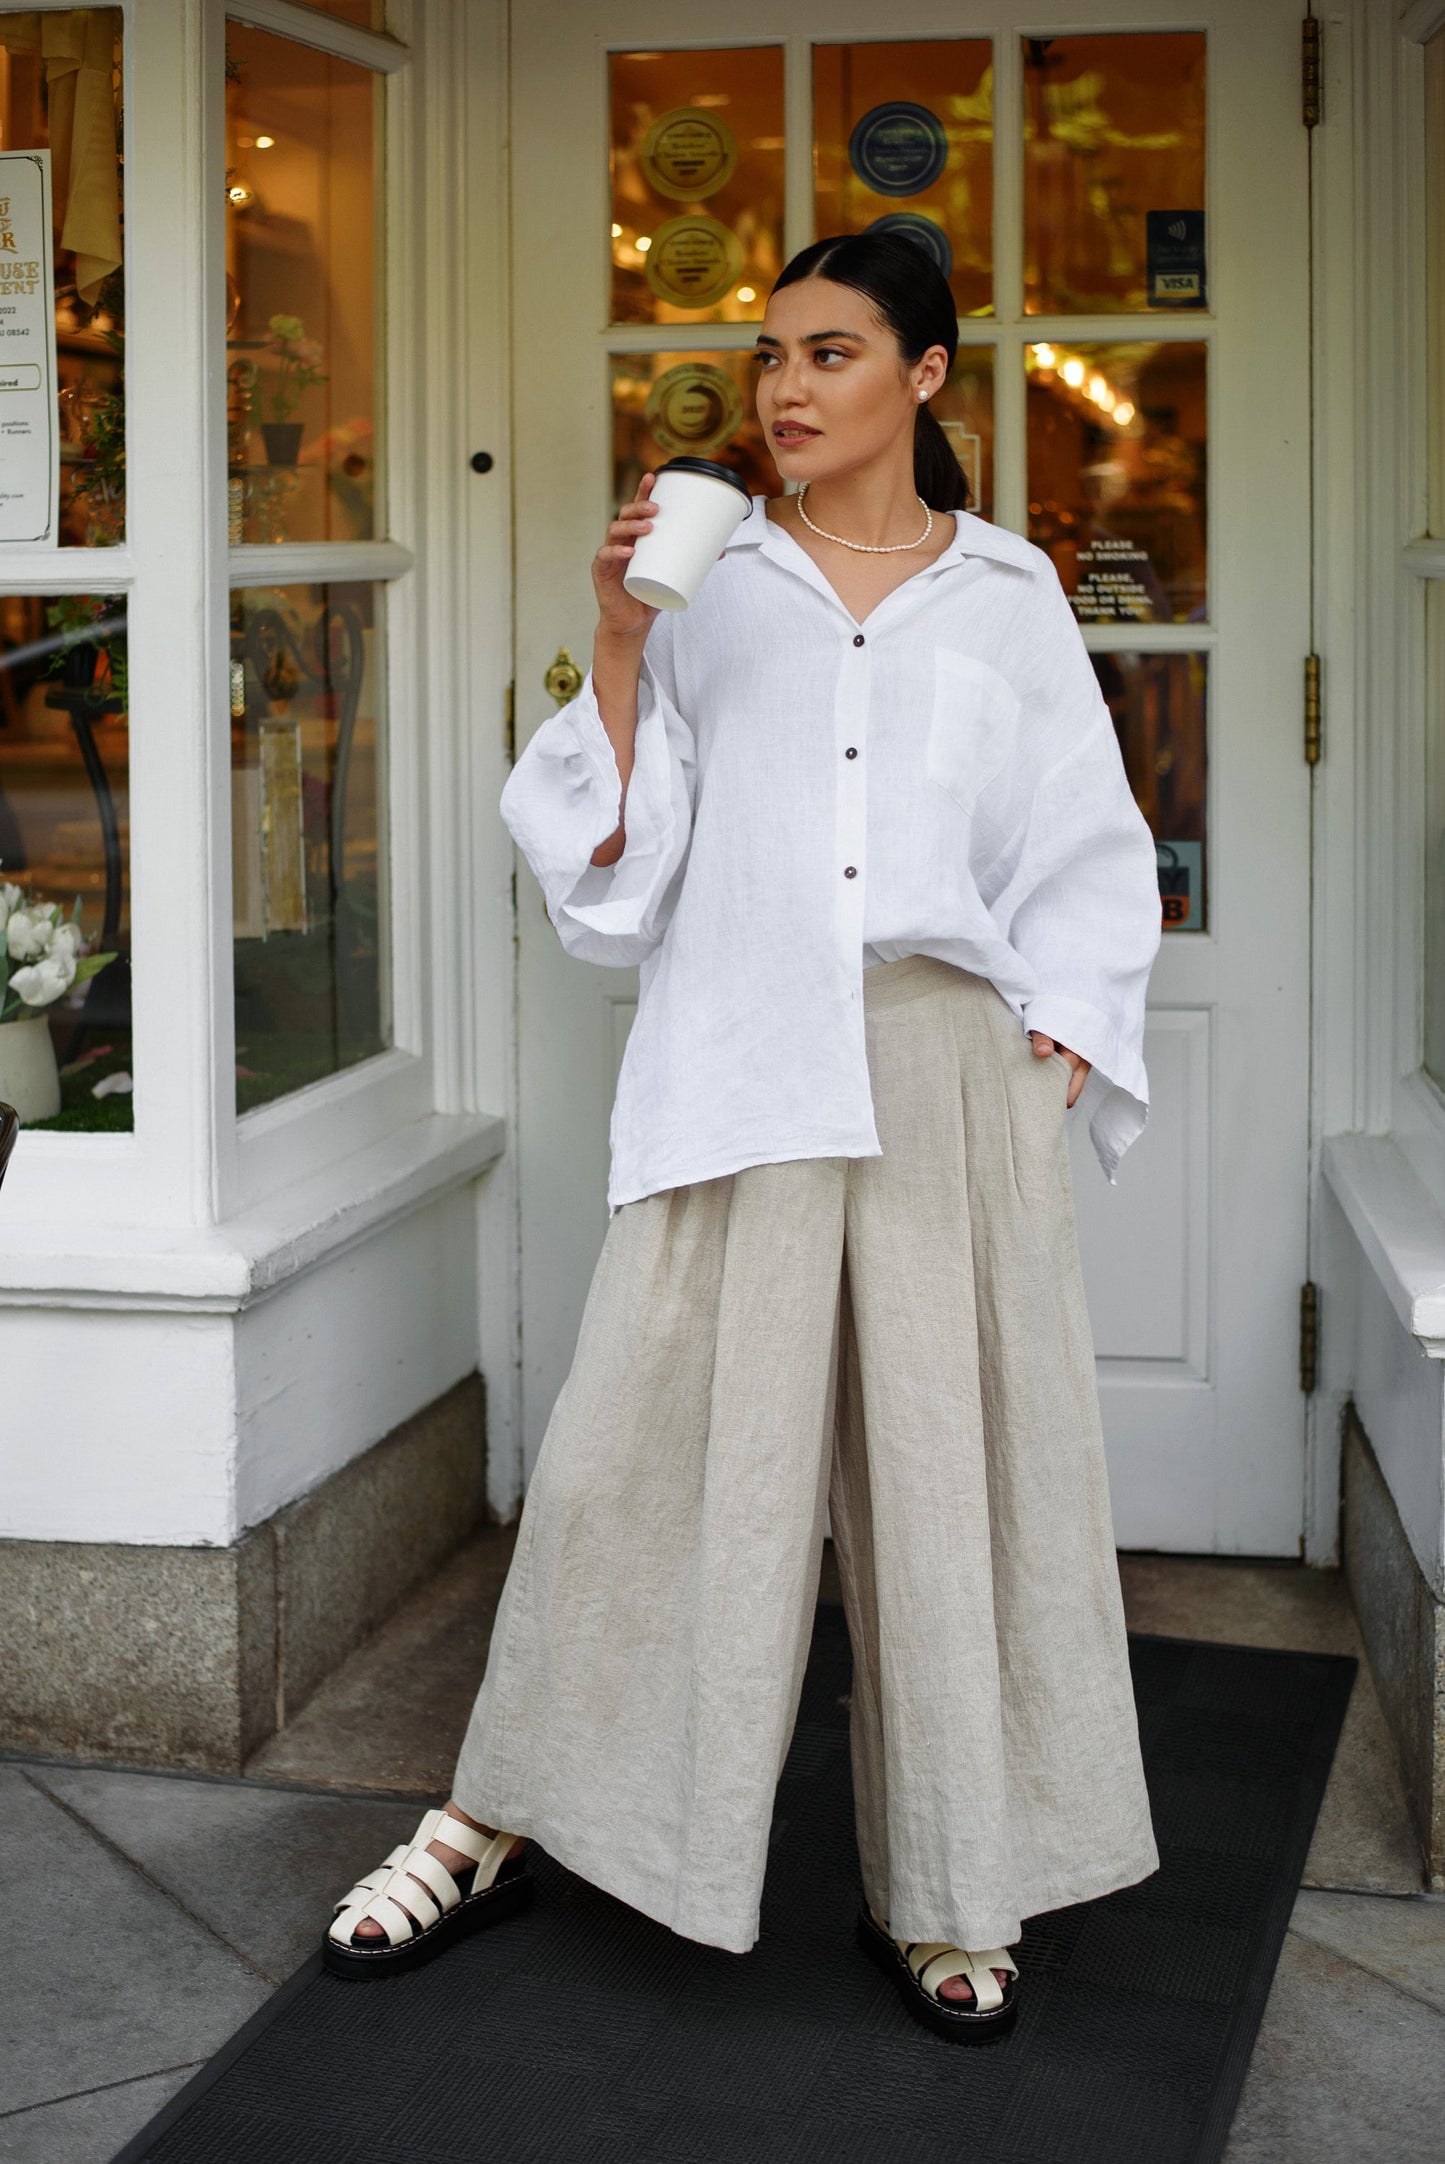 Oversized linen shirt in white, relaxed fit visible from the front.